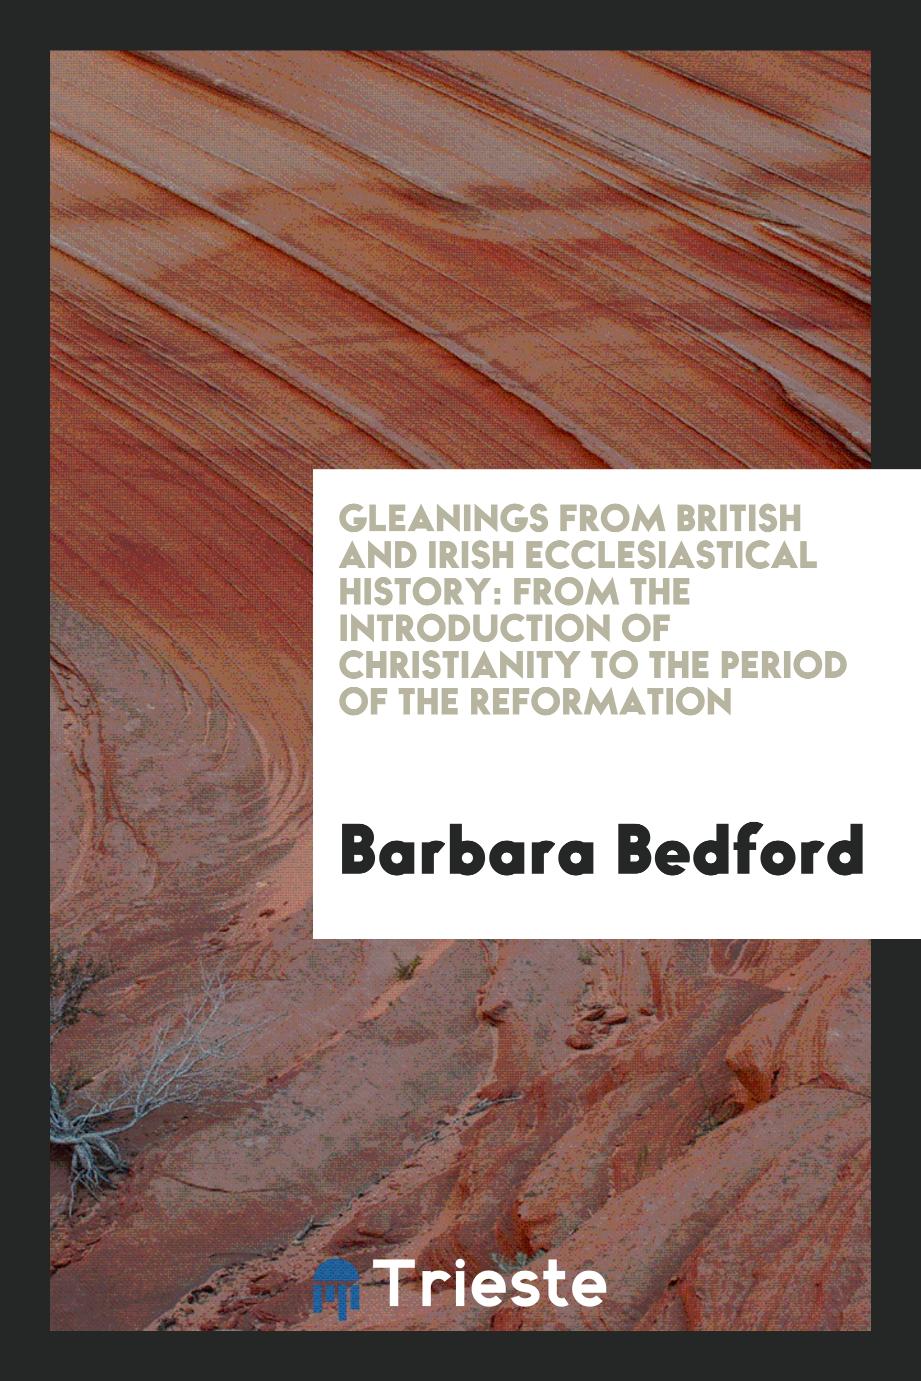 Gleanings from British and Irish Ecclesiastical History: From the Introduction of Christianity to the Period of the Reformation